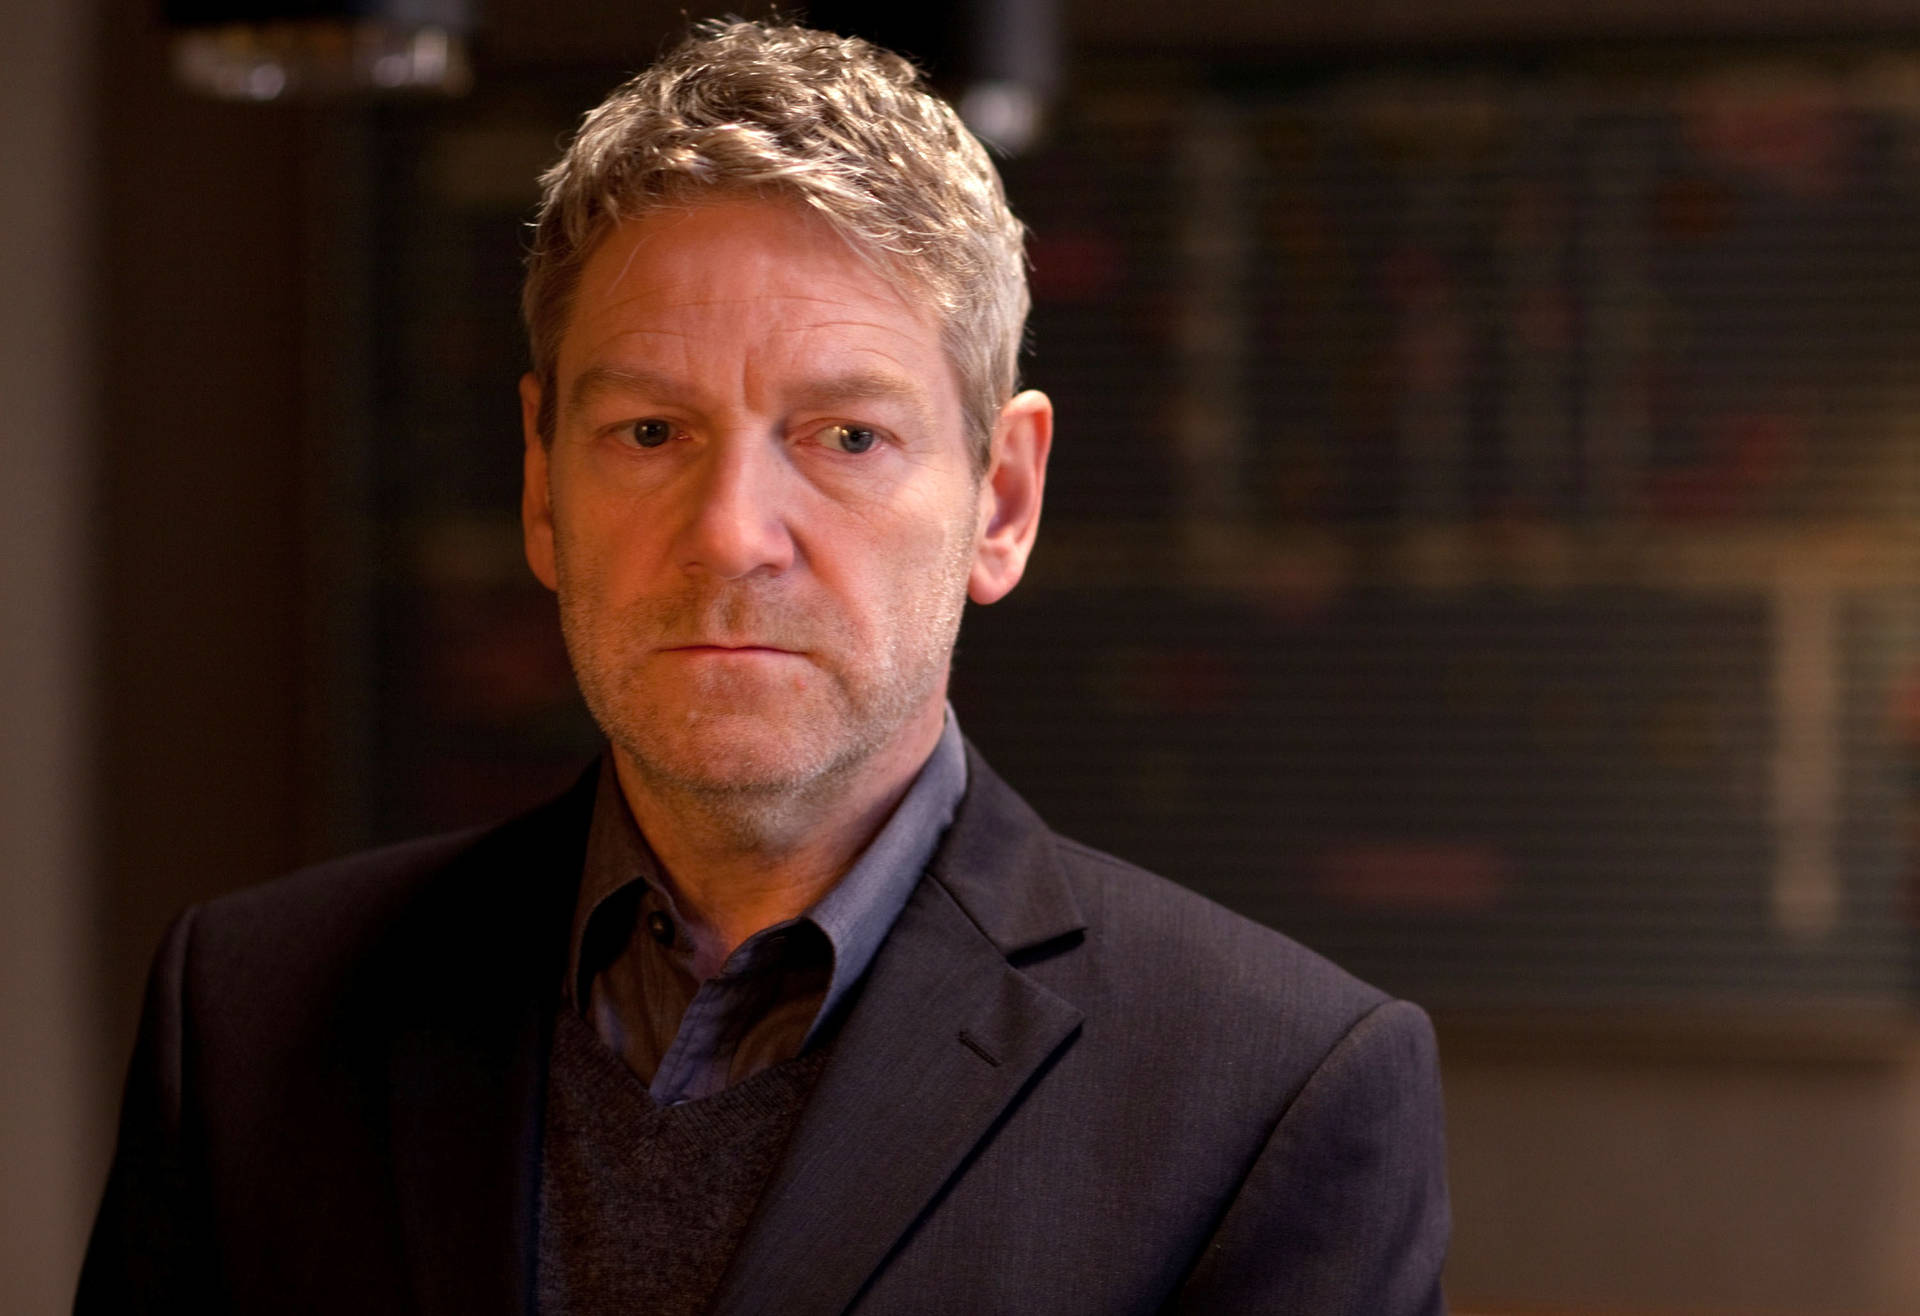 Versatile actor Kenneth Branagh in deep thought Wallpaper